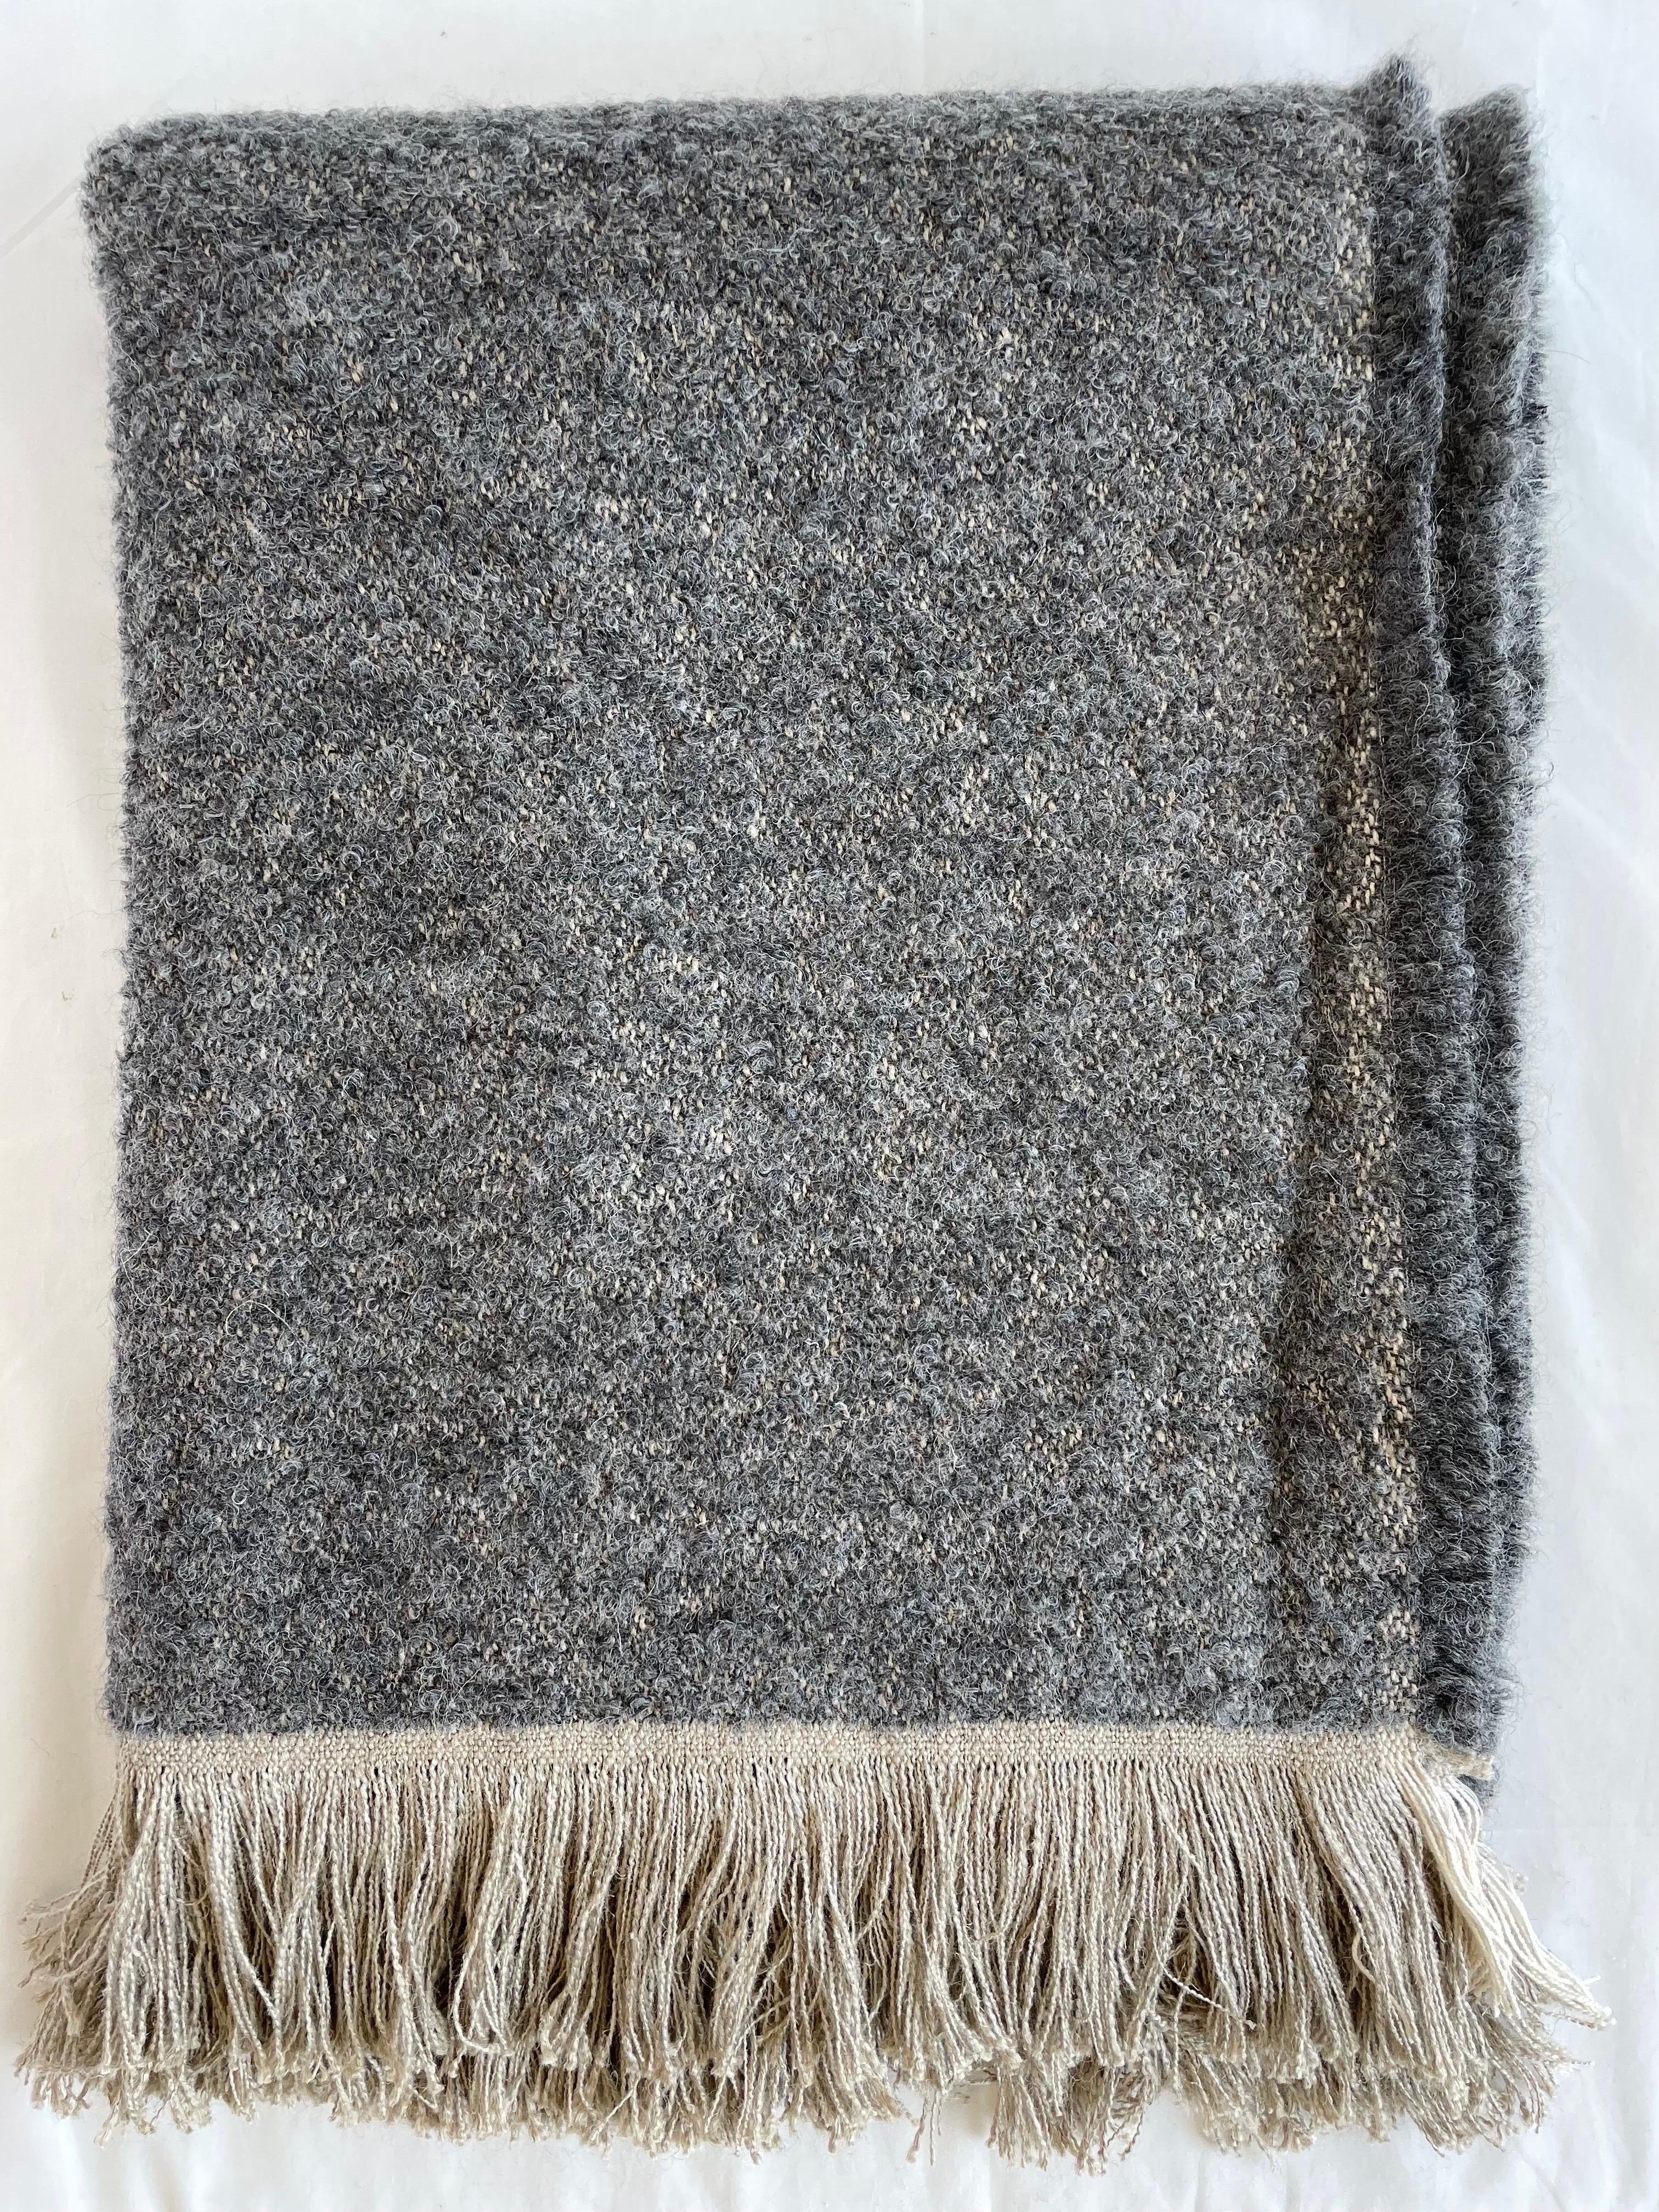 Woven in Belgium using traditional weaving techniques, Bloom Home Inc Winnie features a combination of smooth Belgian Linen and woolly Alpaca. This combination of fibers forms an exquisite touch and weight, and a texture that looks as warm as it